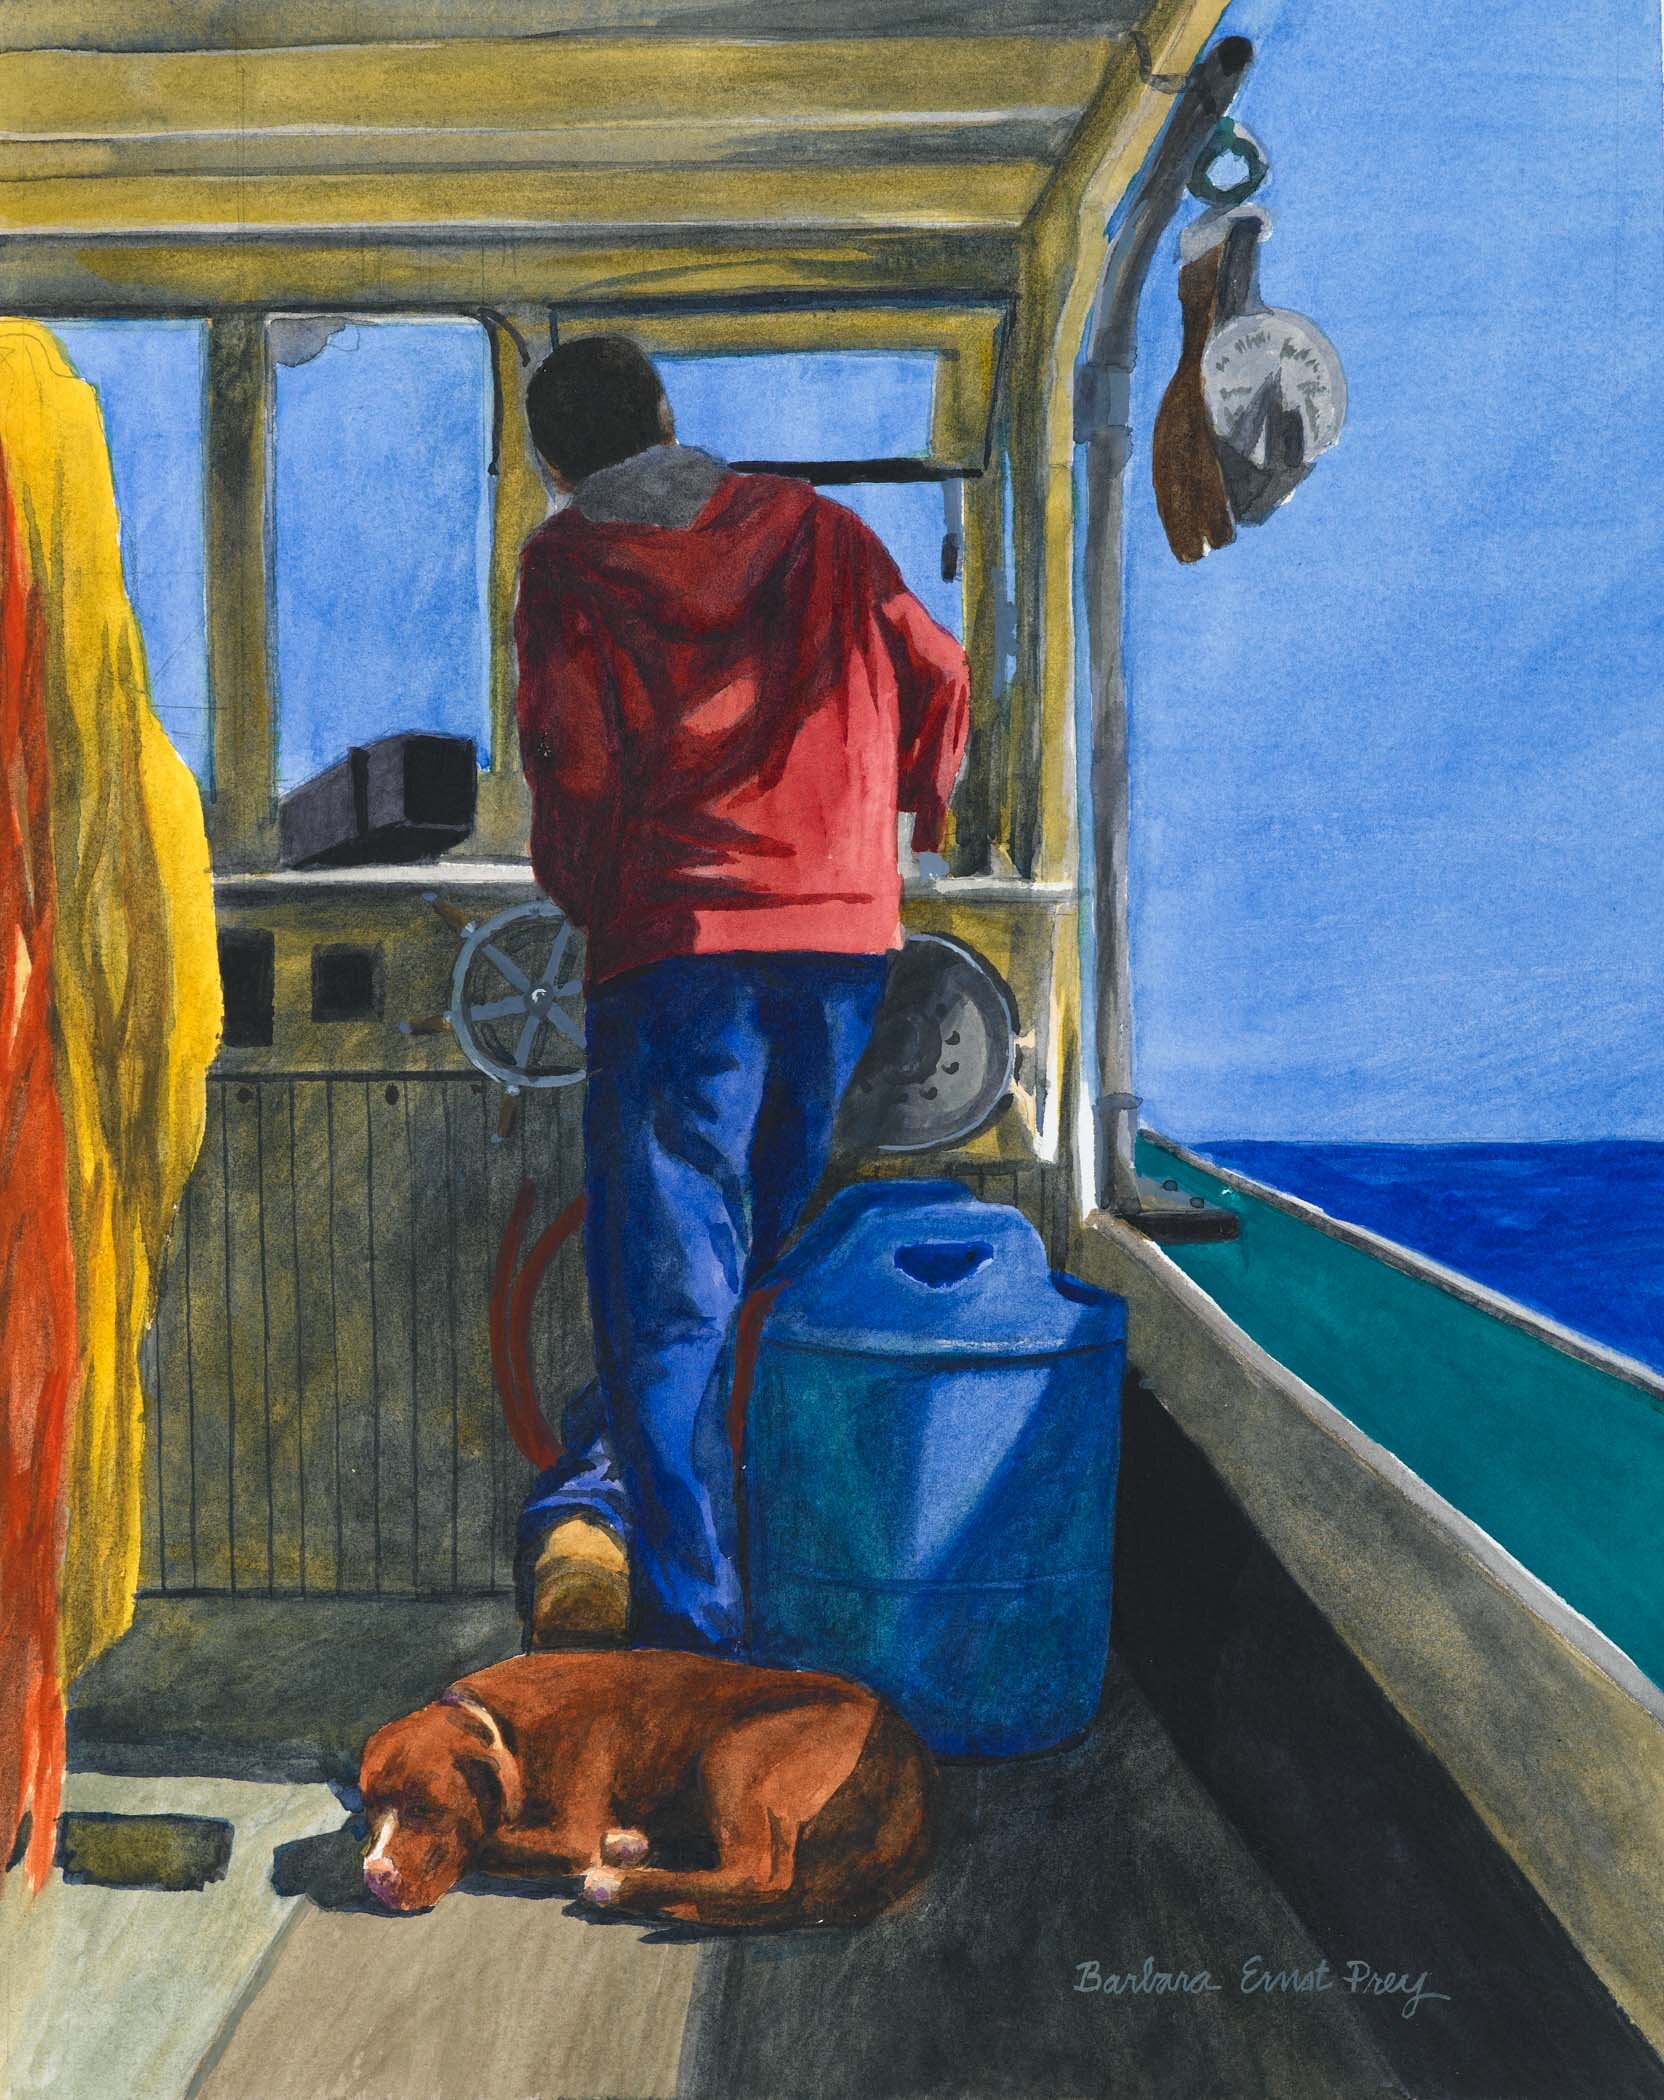 Passenger, 2014, Watercolor, 11.5 x 14.5 inches